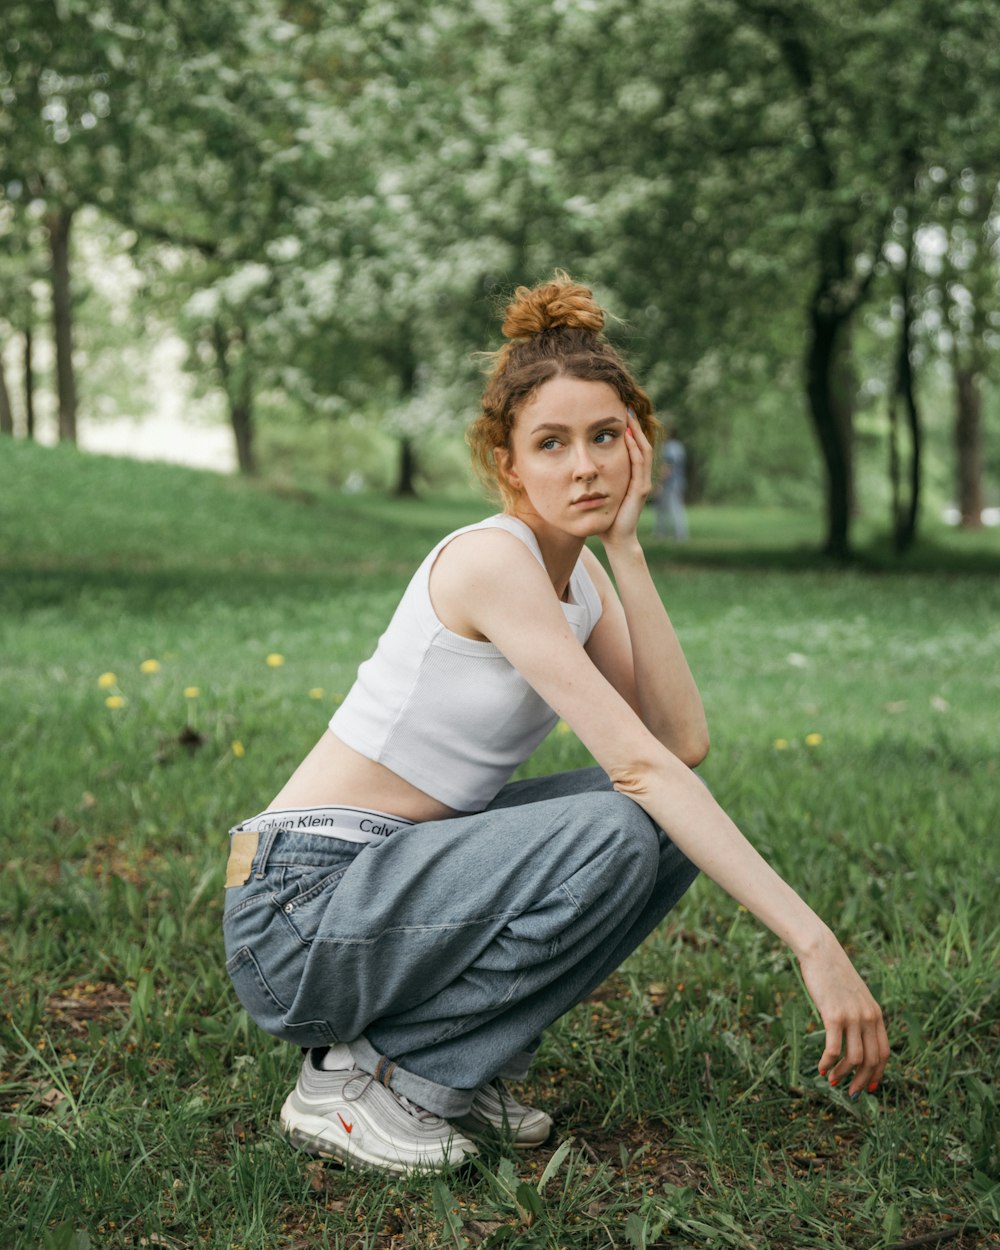 a woman squatting on the grass in a park